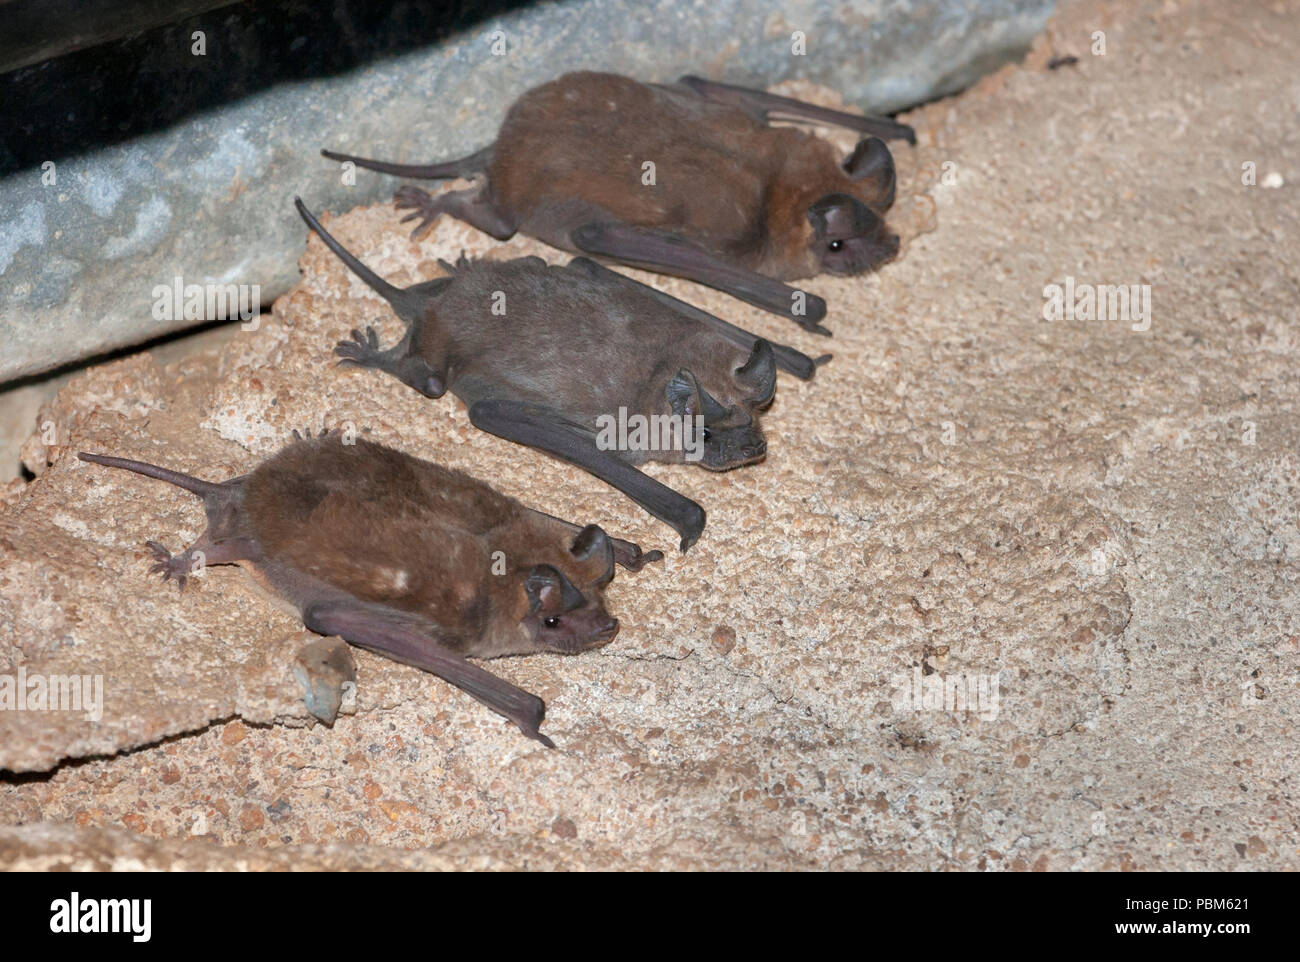 African little free-tailed bats (Chaerephon pumilus) under the roof of a rural building, Kenya. Stock Photo